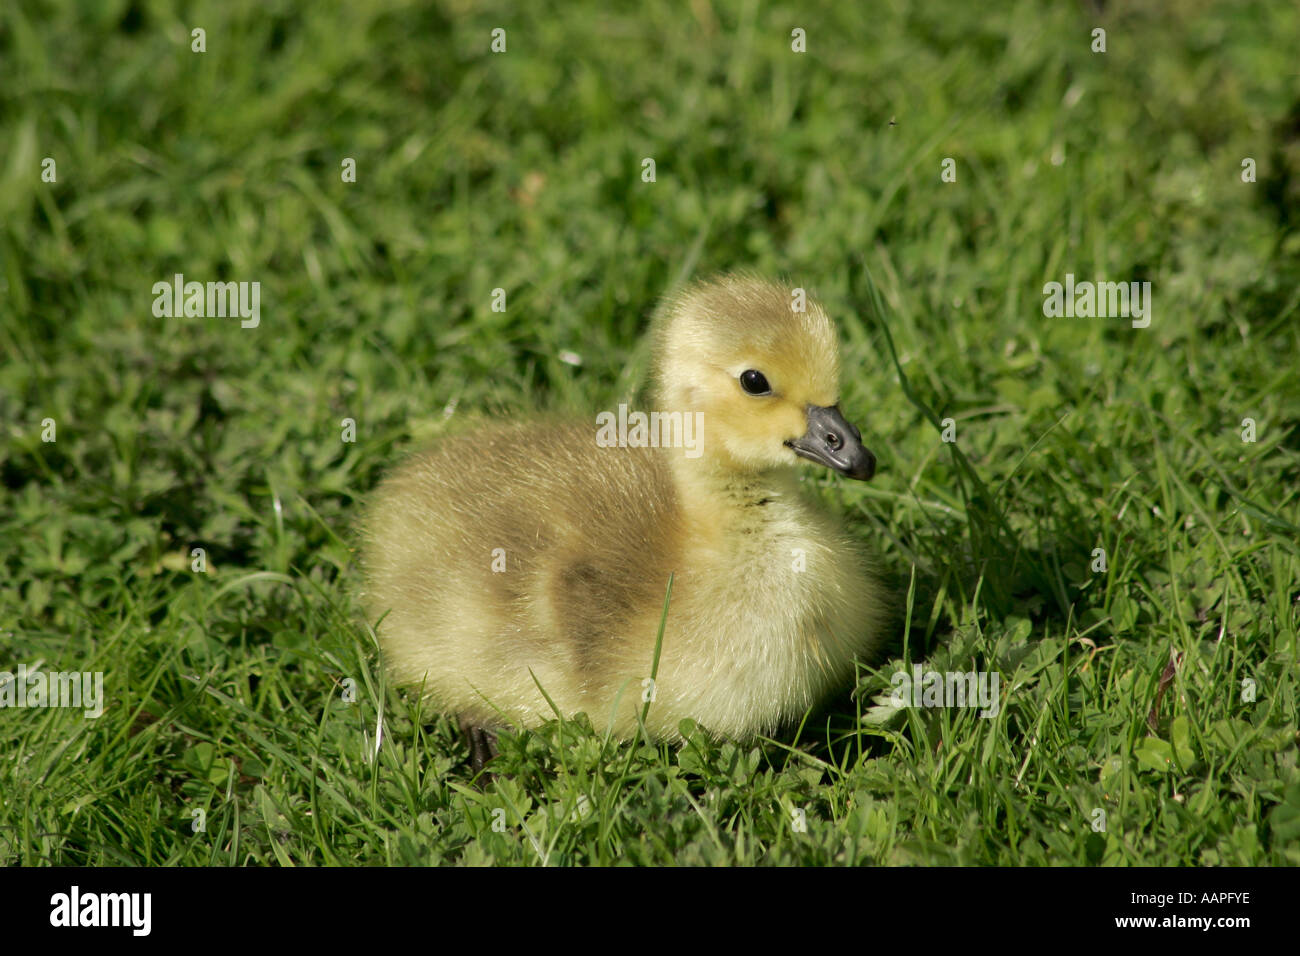 A single young Canada Goose gosling (Branta canadensis) sitting down on grass Stock Photo